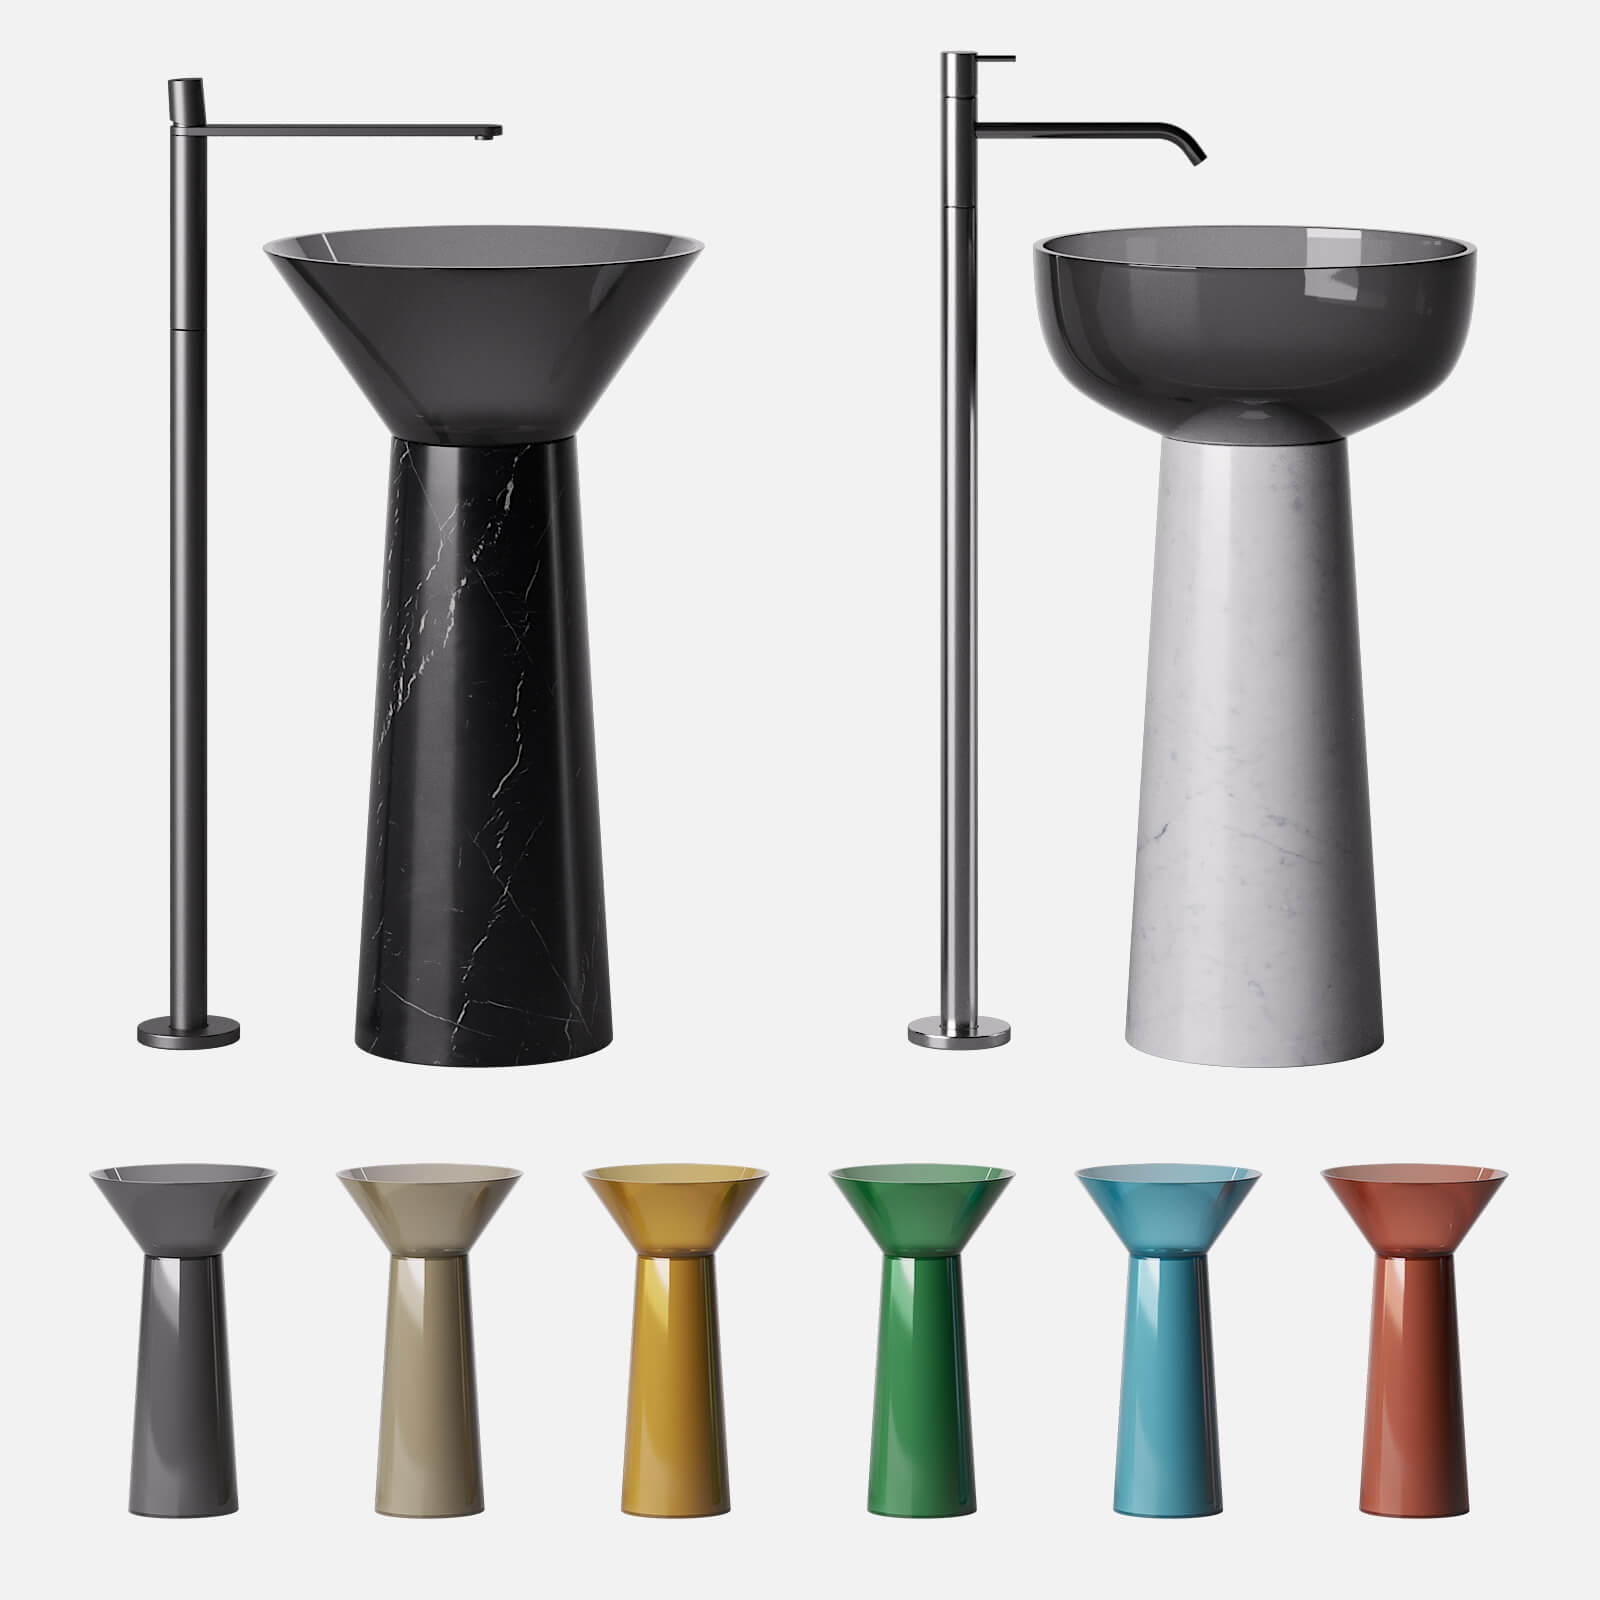 fossil Made a contract wall set of sinks and faucets Antonio Lupi Albume - download 3d model |  ZeelProject.com